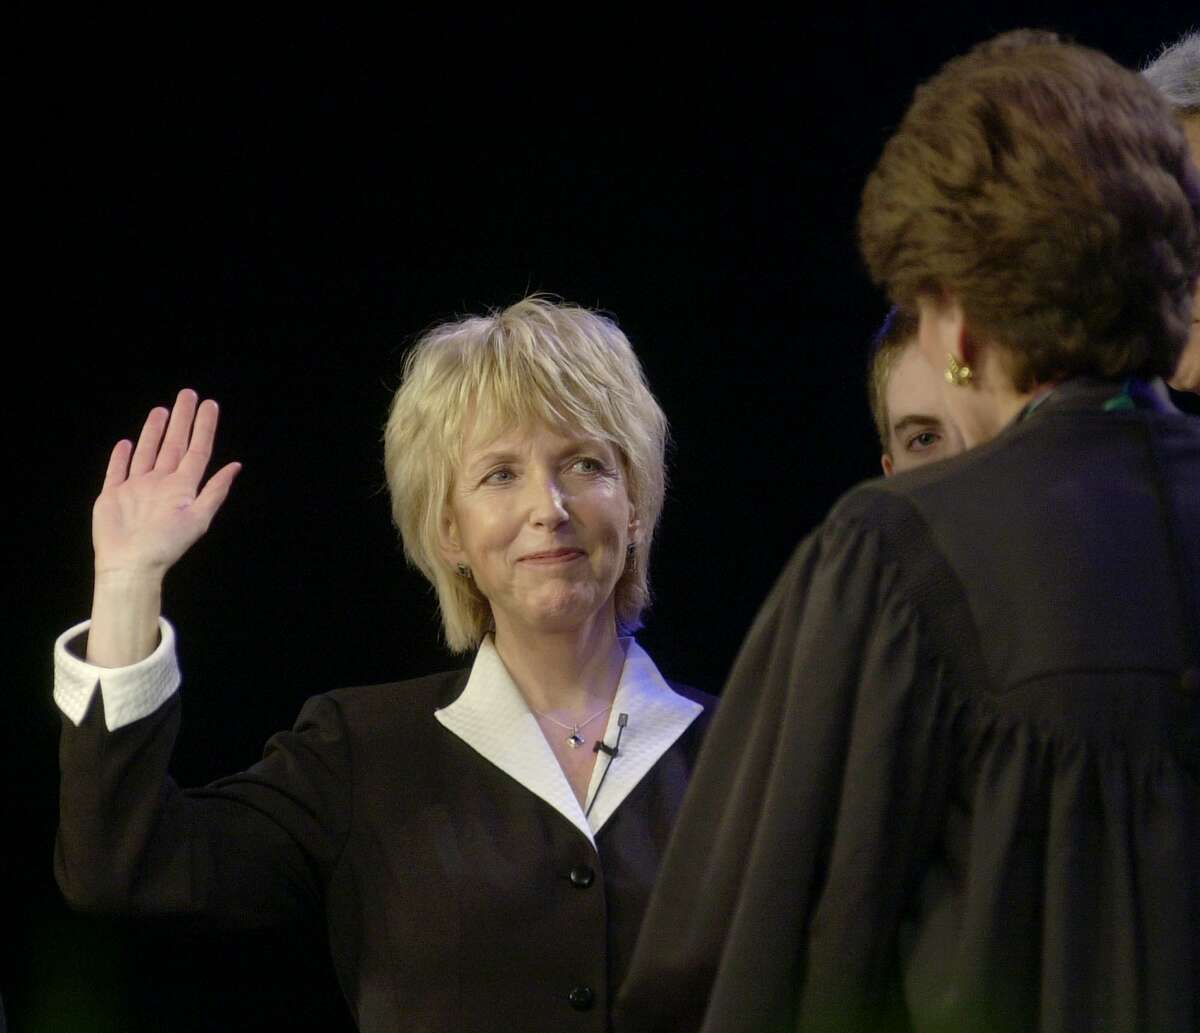 New York Lt. Gov. Mary Donohue is sworn in as lieutenant governor of New York, Wednesday, Jan. 1, 2003, at the state Capitol in Albany, N.Y., Chief Judge of the Court of Appeals Judith Kaye, right, swears in Donohue.